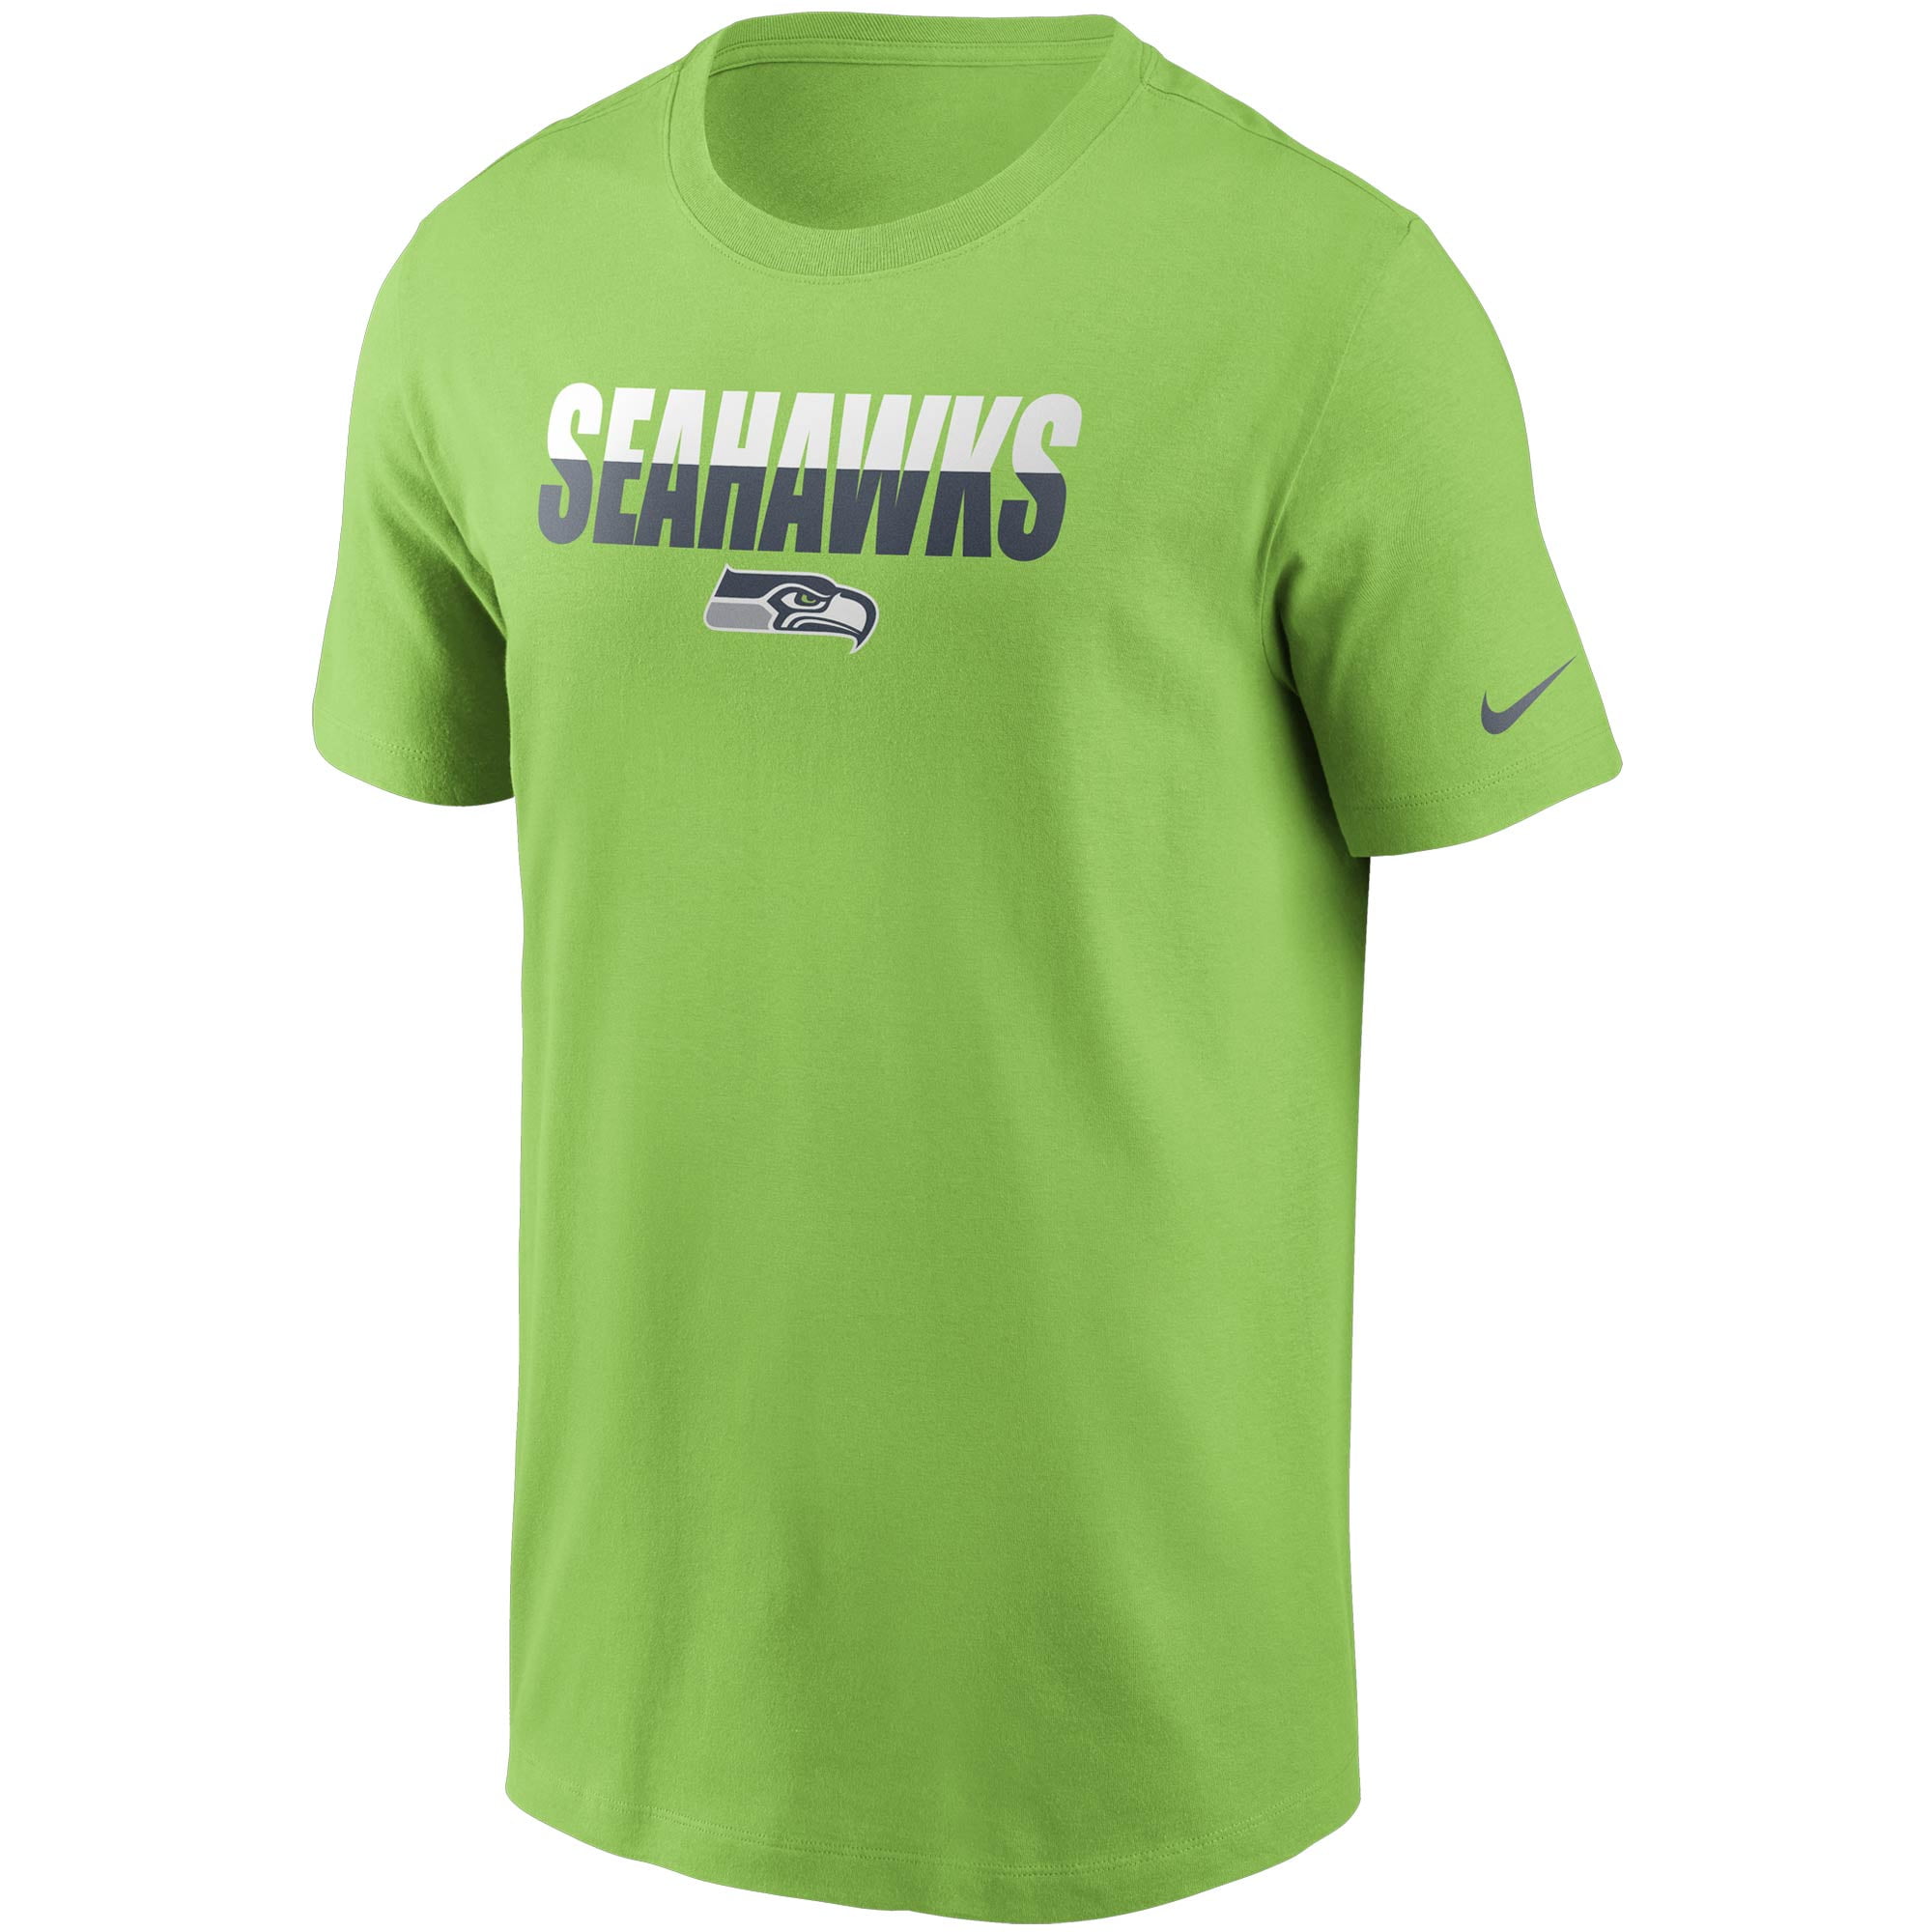 nike shirt with lime green